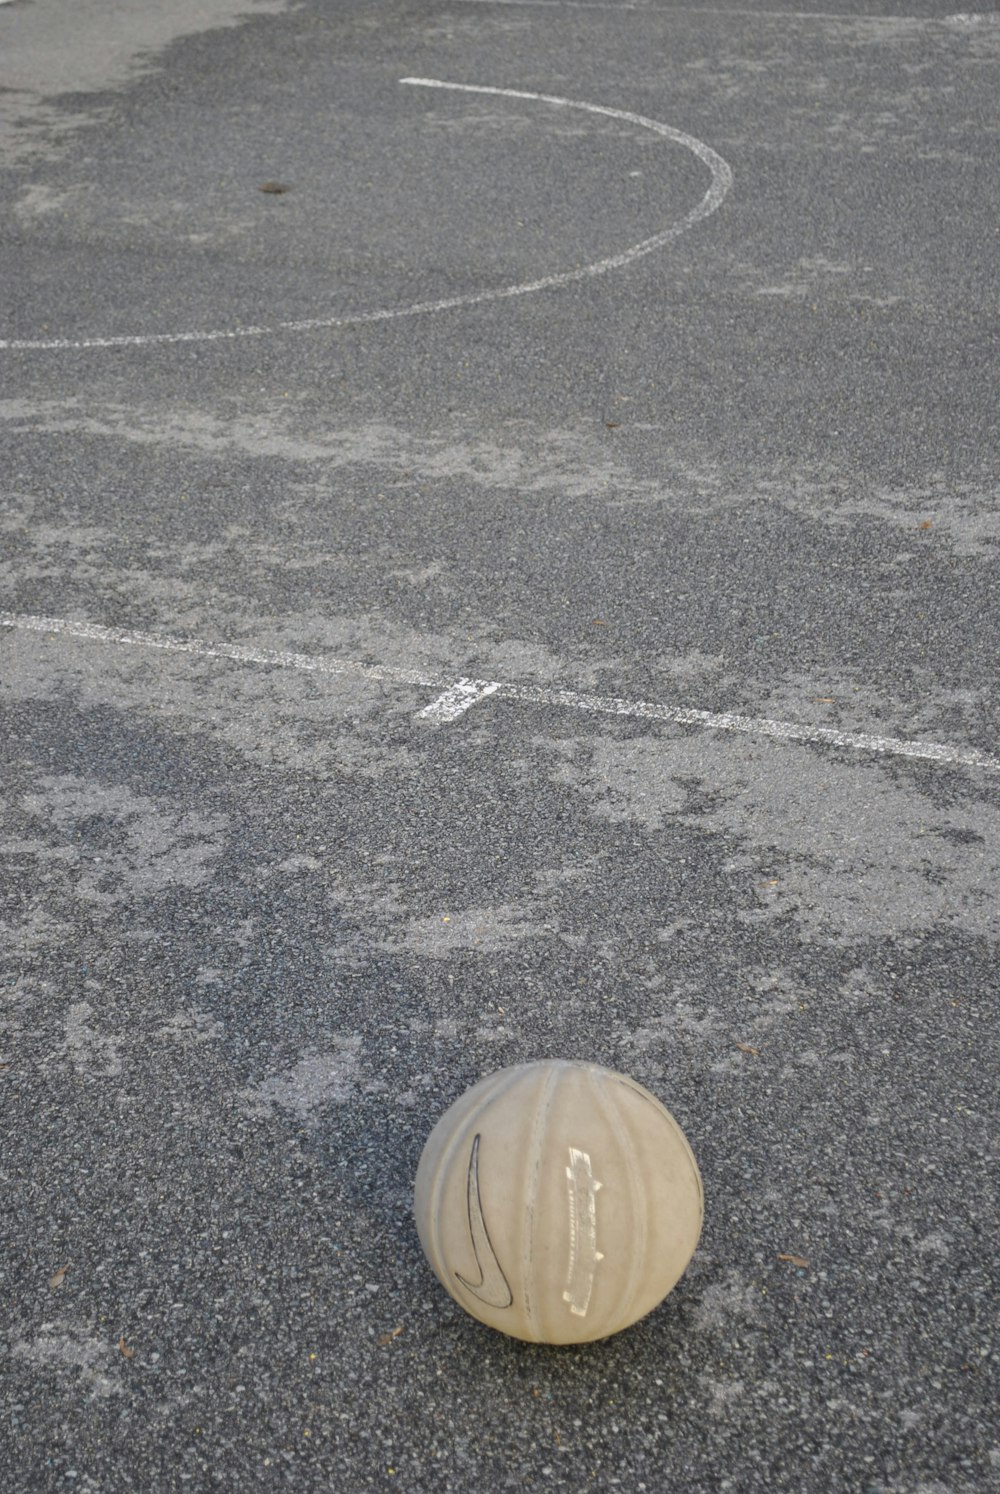 a frisbee on the ground